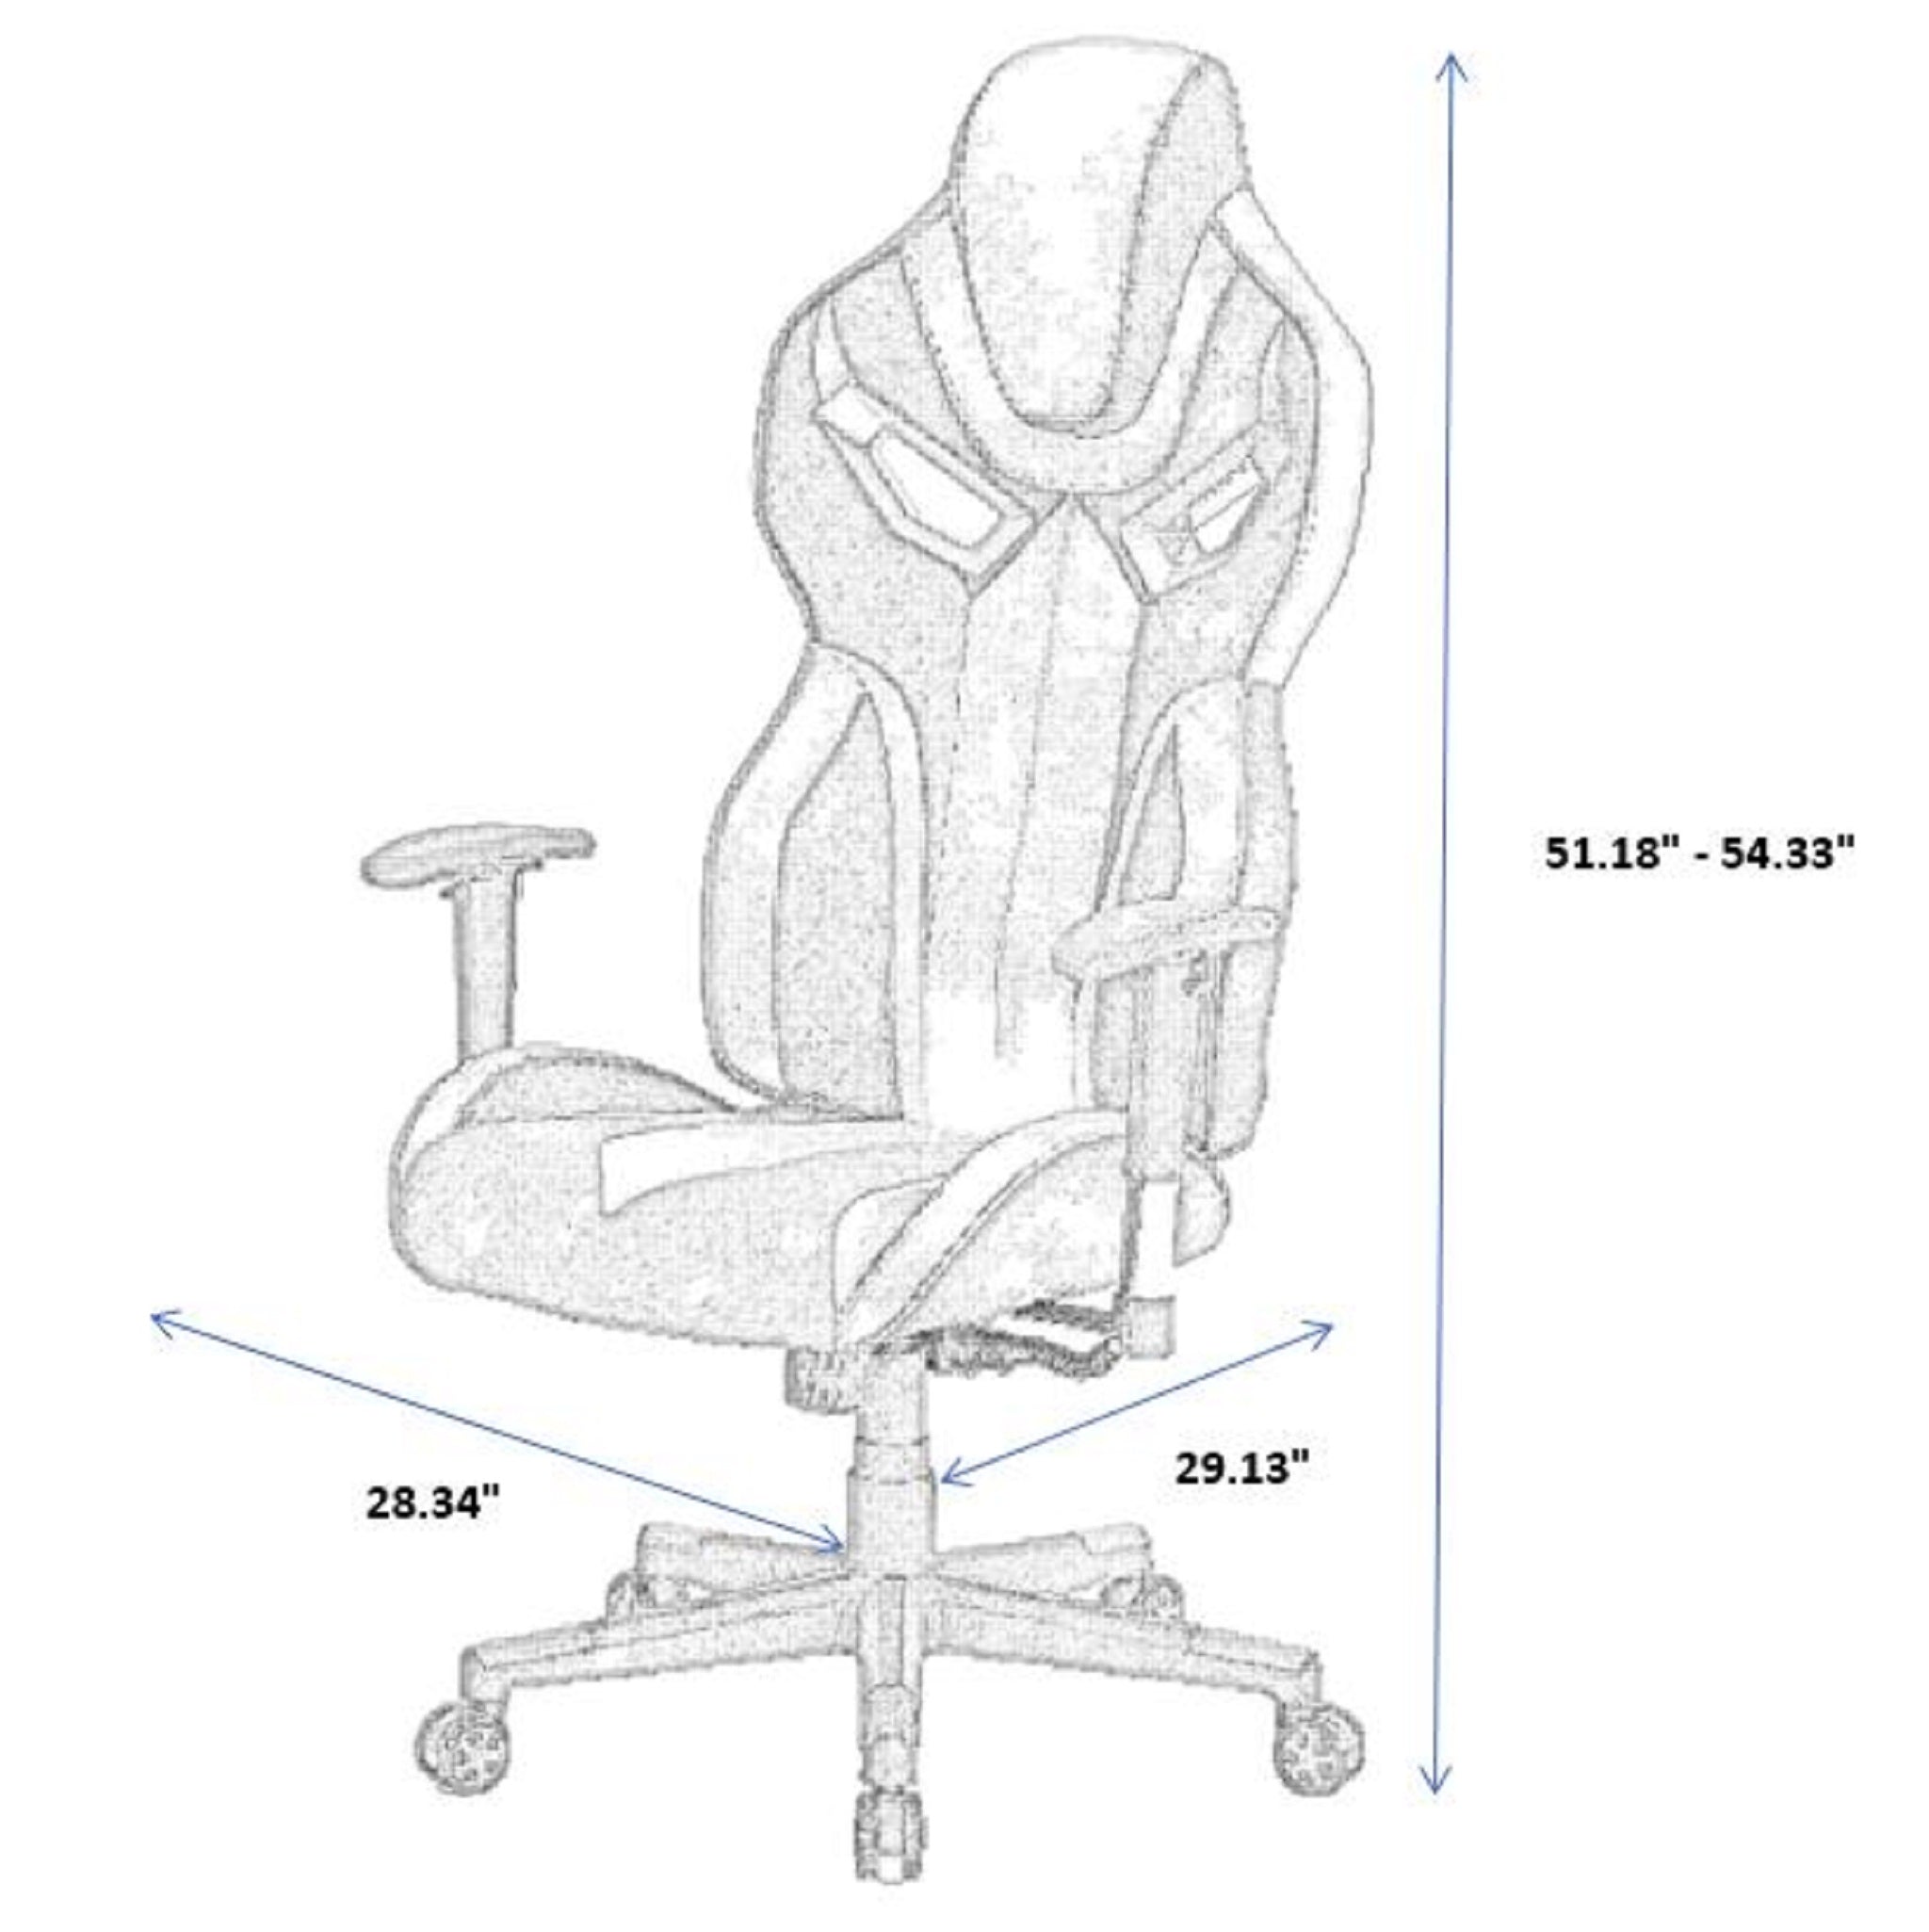 ViscoLogic FORCE Ergonomic Backrest and Seat Height Adjustment Computer Gaming Chair